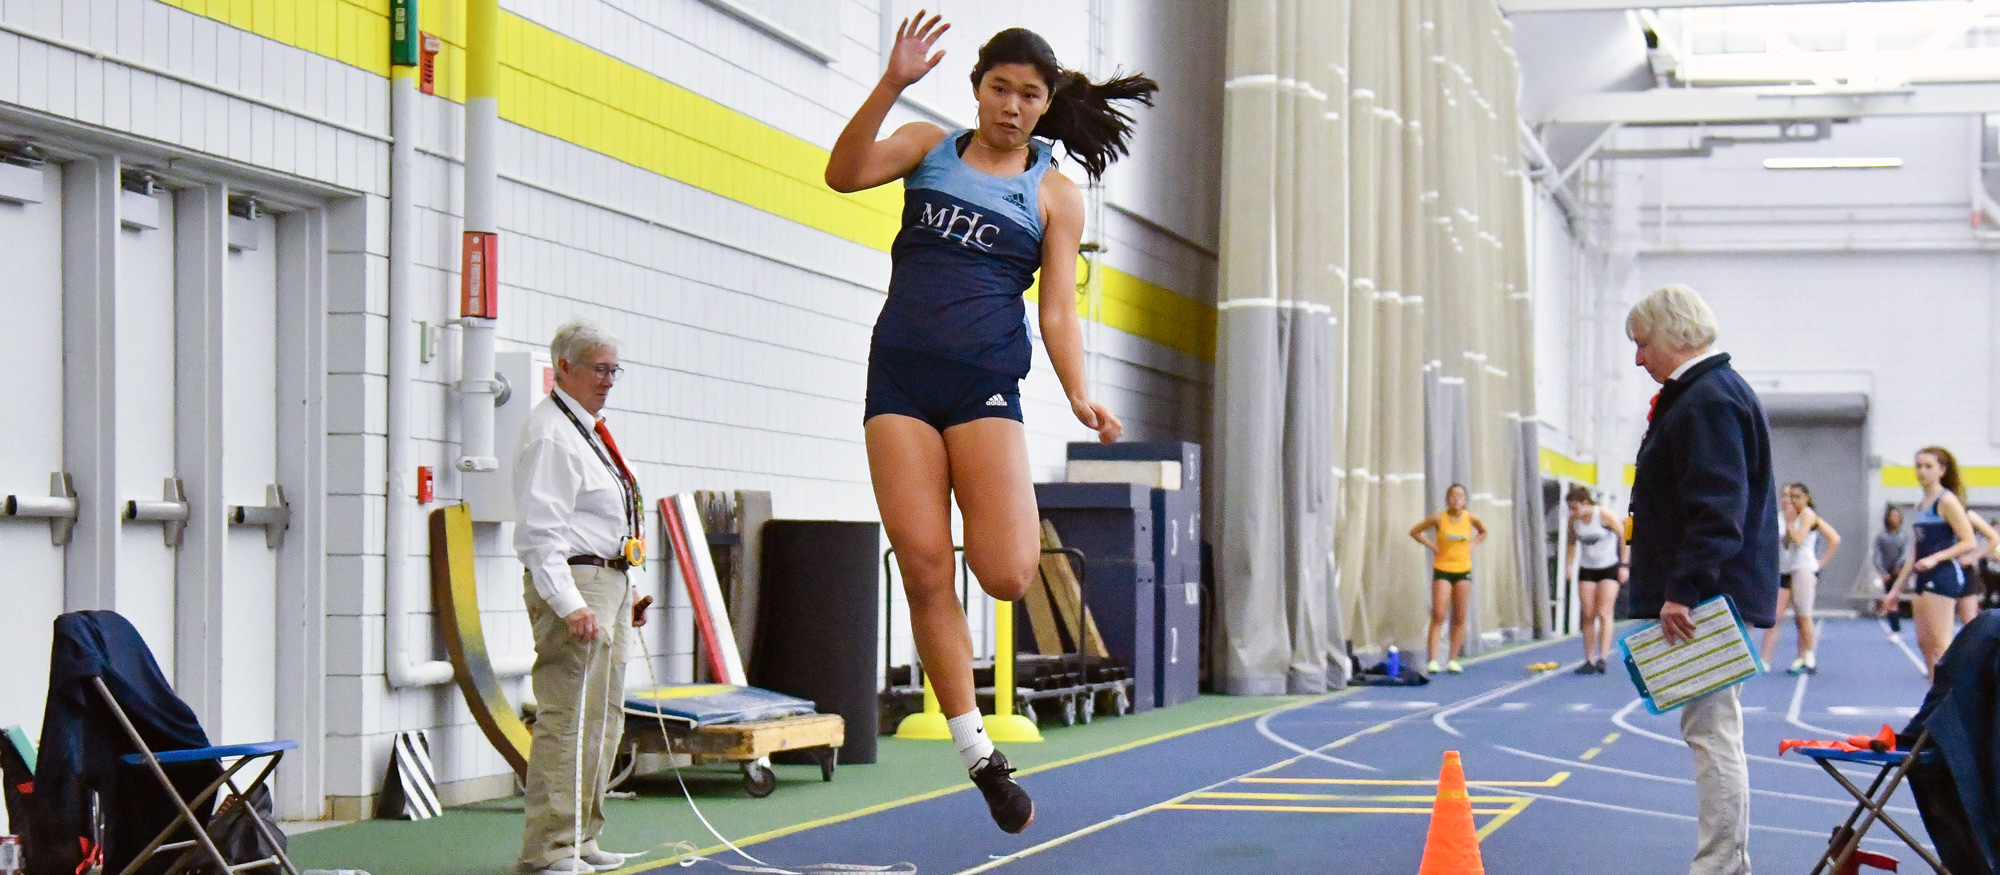 Elle Rimando finished second in both the triple jump and the 60-meter dash, and third in the long jump at the Branwen Smith-King Invitational at Tufts on Jan. 21, 2023. (RJB Sports file photo)